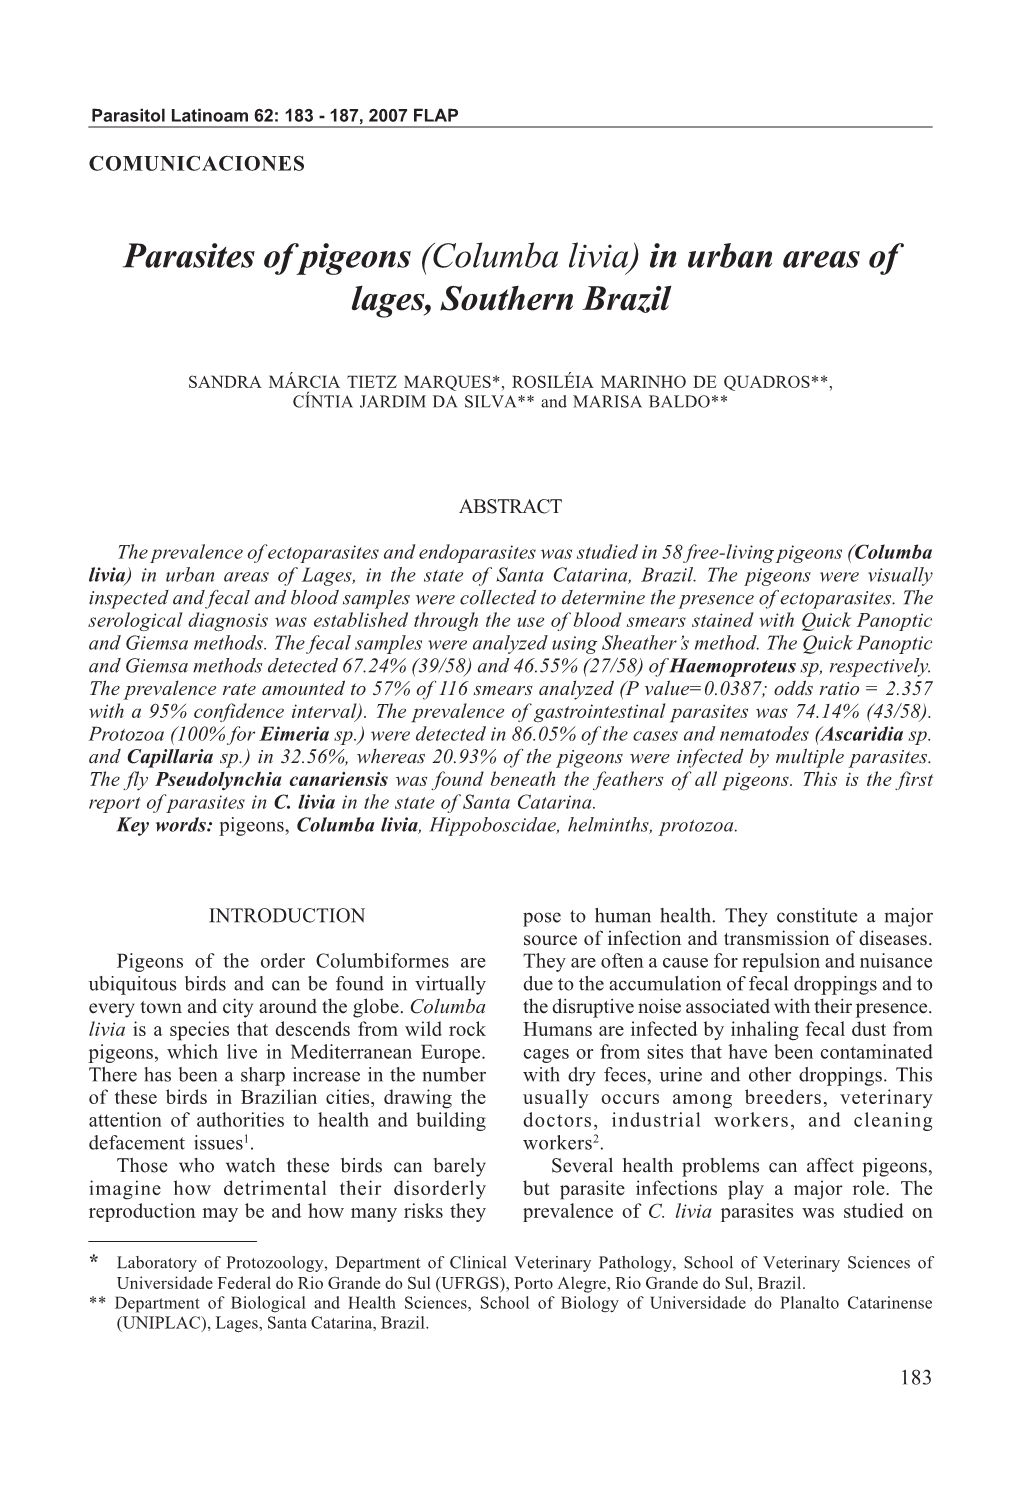 Parasites of Pigeons (Columba Livia) in Urban Areas of Lages, Southern Brazil